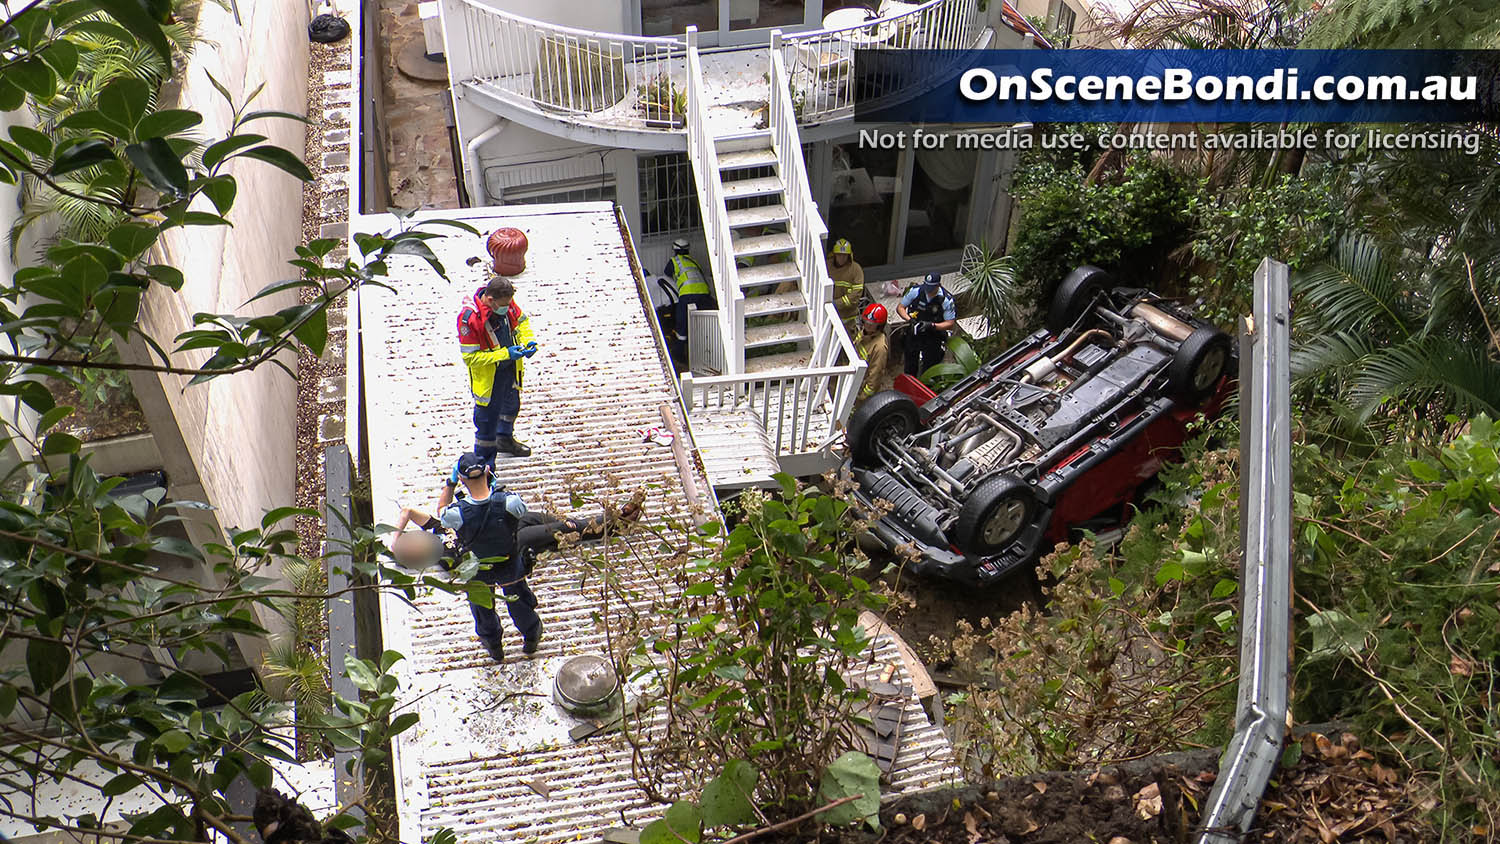 Two men escape death after car plunges 10 metres over a cliff in Bellevue Hill